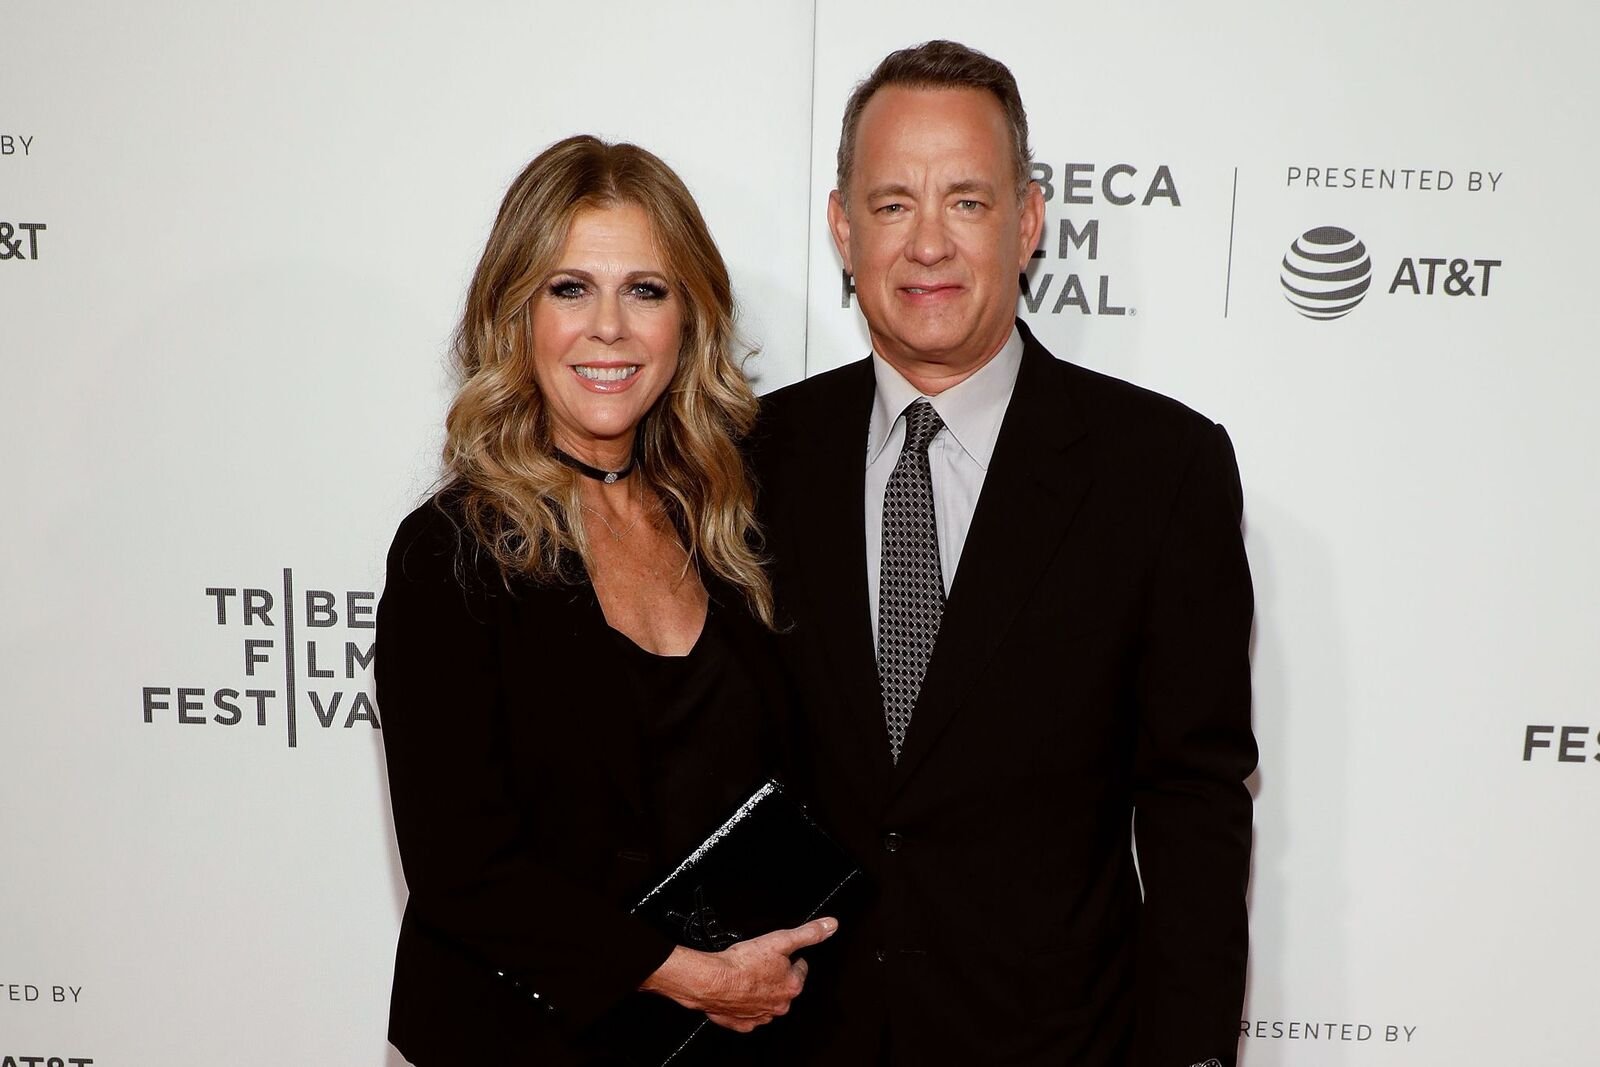 Rita Wilson and Tom Hanks attend the premiere of "The Circle" during the 2017 Tribeca Film Festival at Borough of Manhattan Community College on April 26, 2017. | Source: Getty Images